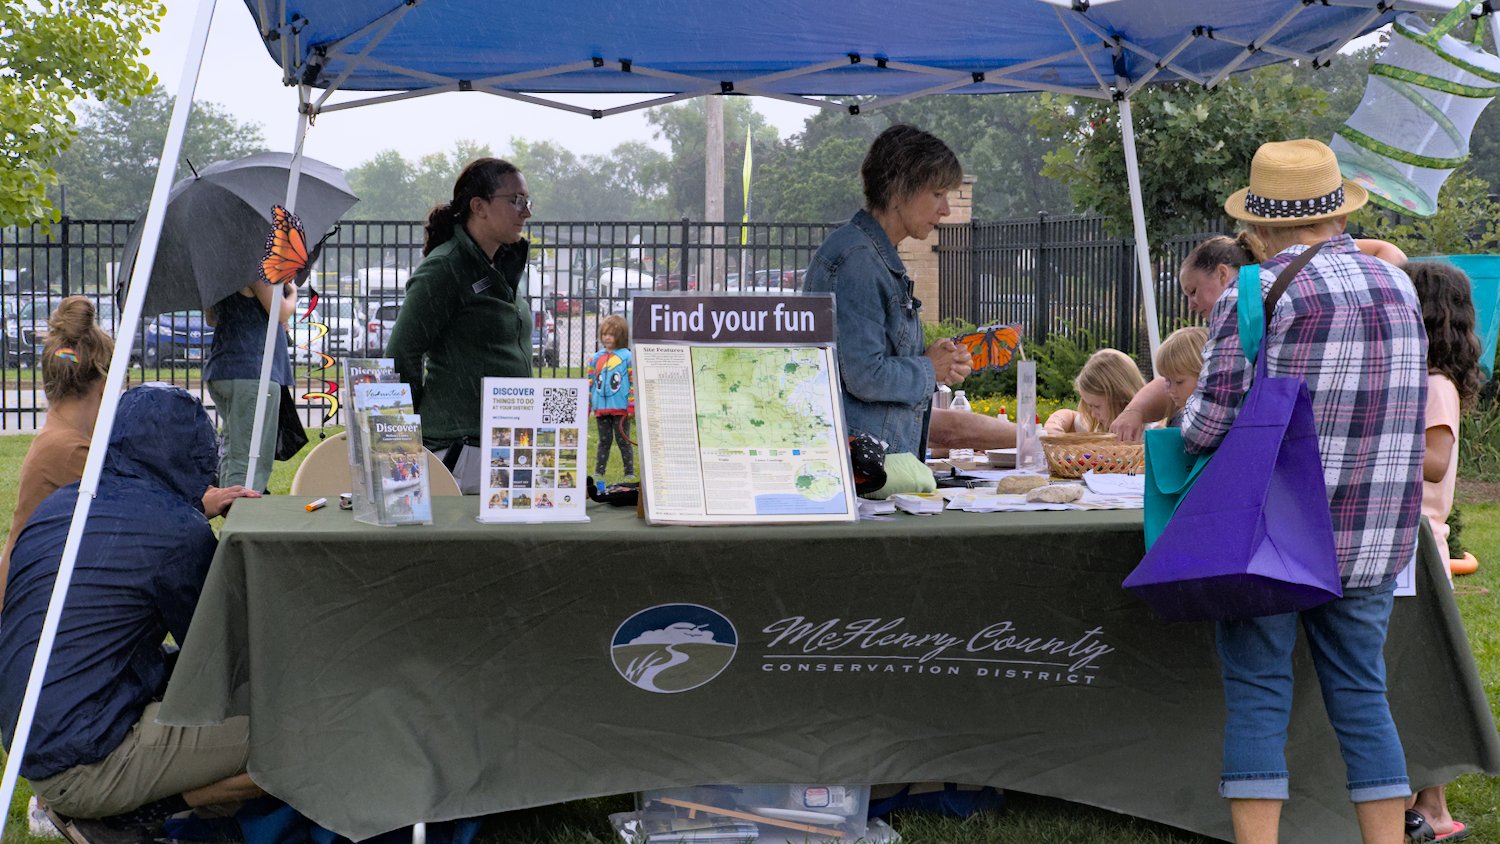 McHenry County Conservation District tent with coloring pages and information about county conservation sites.